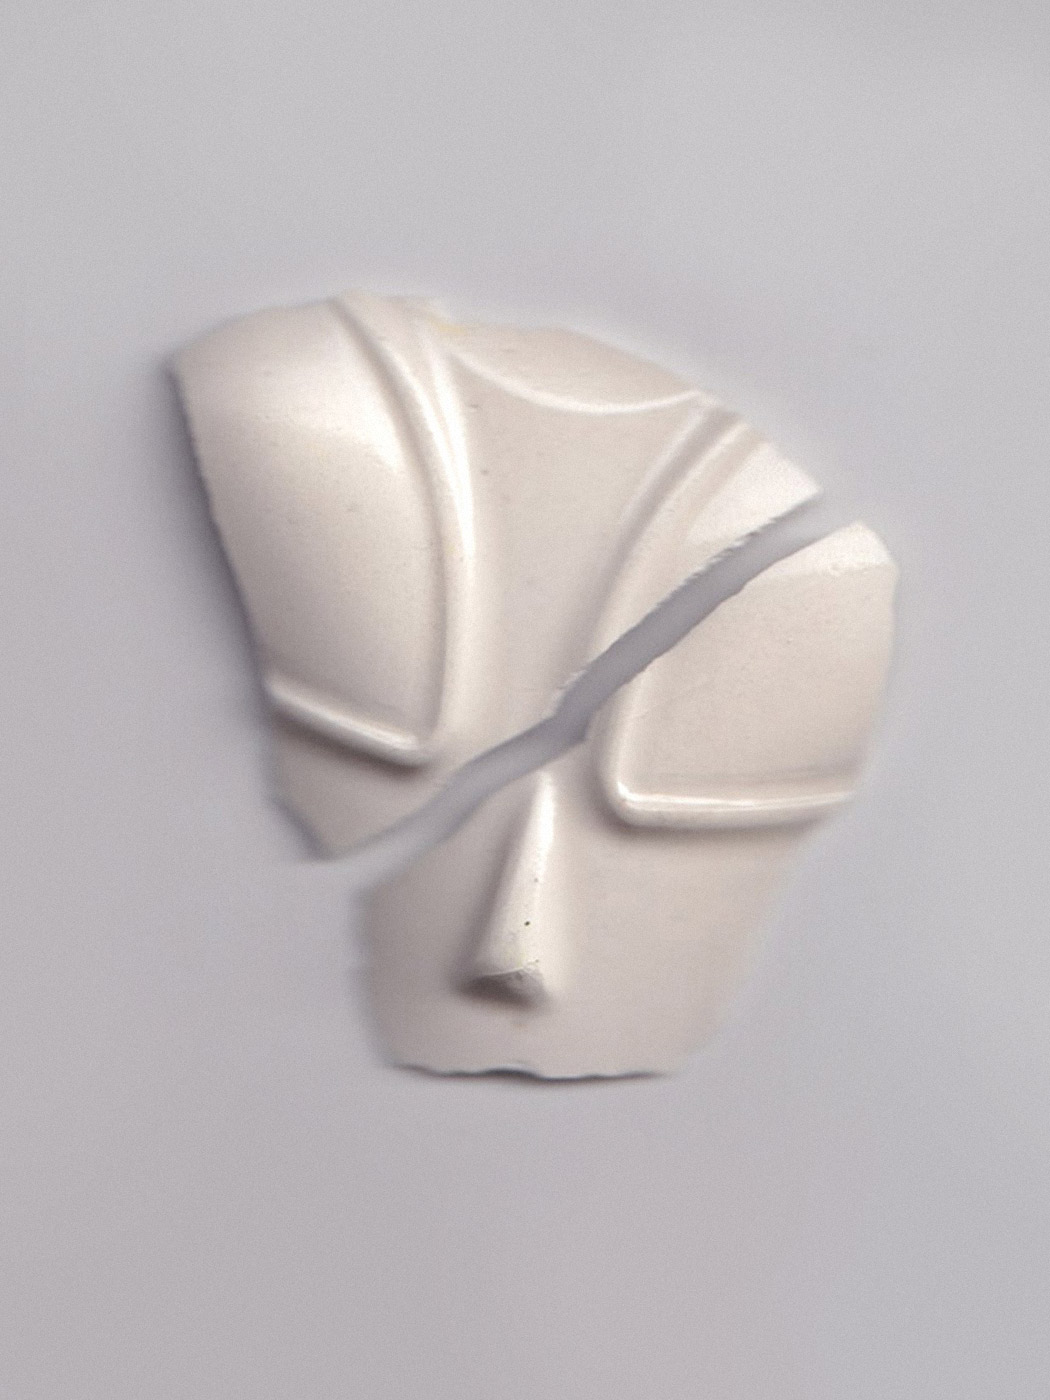 A cast of a non-human face made of glazed plaster.